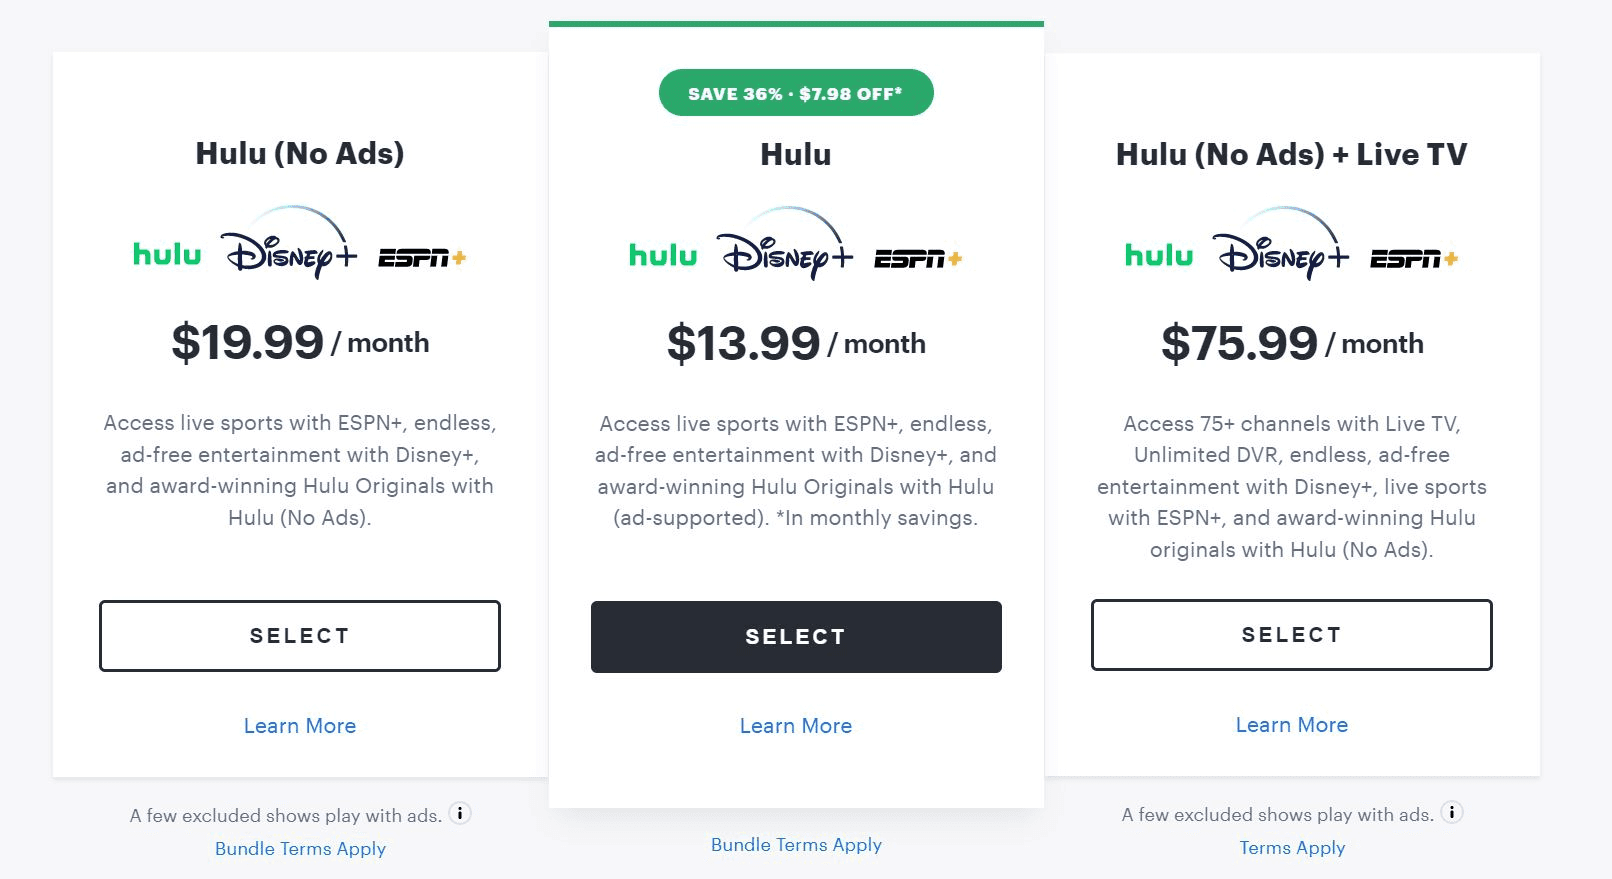 Choose your Hulu plan. The Hulu premium account bundle plans with live TV. This Hulu account doesn't have a free trial option.